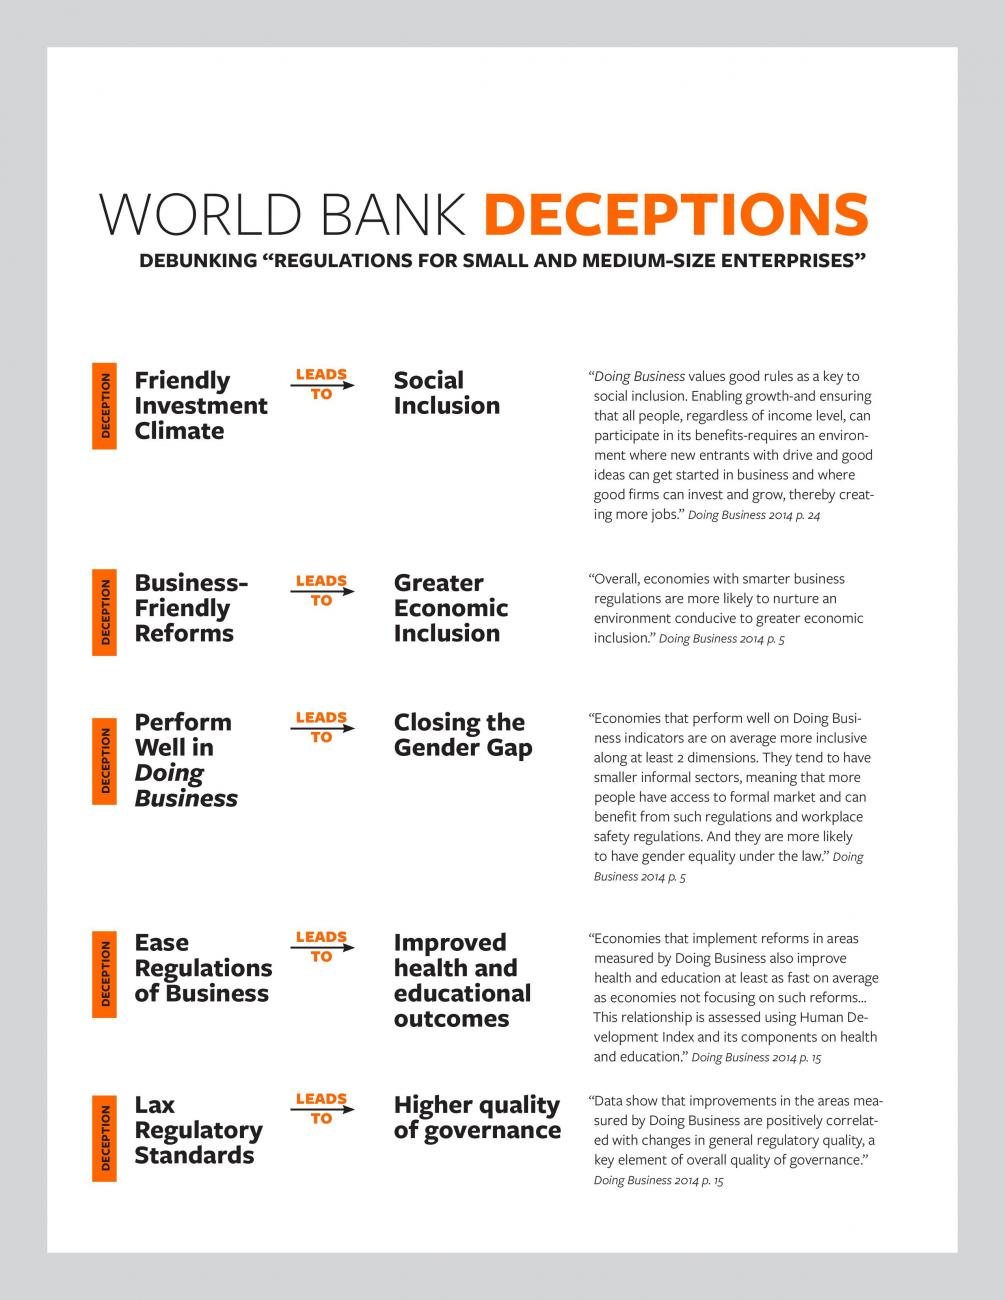 Image on Examining the World Bank’s Doing Business Report